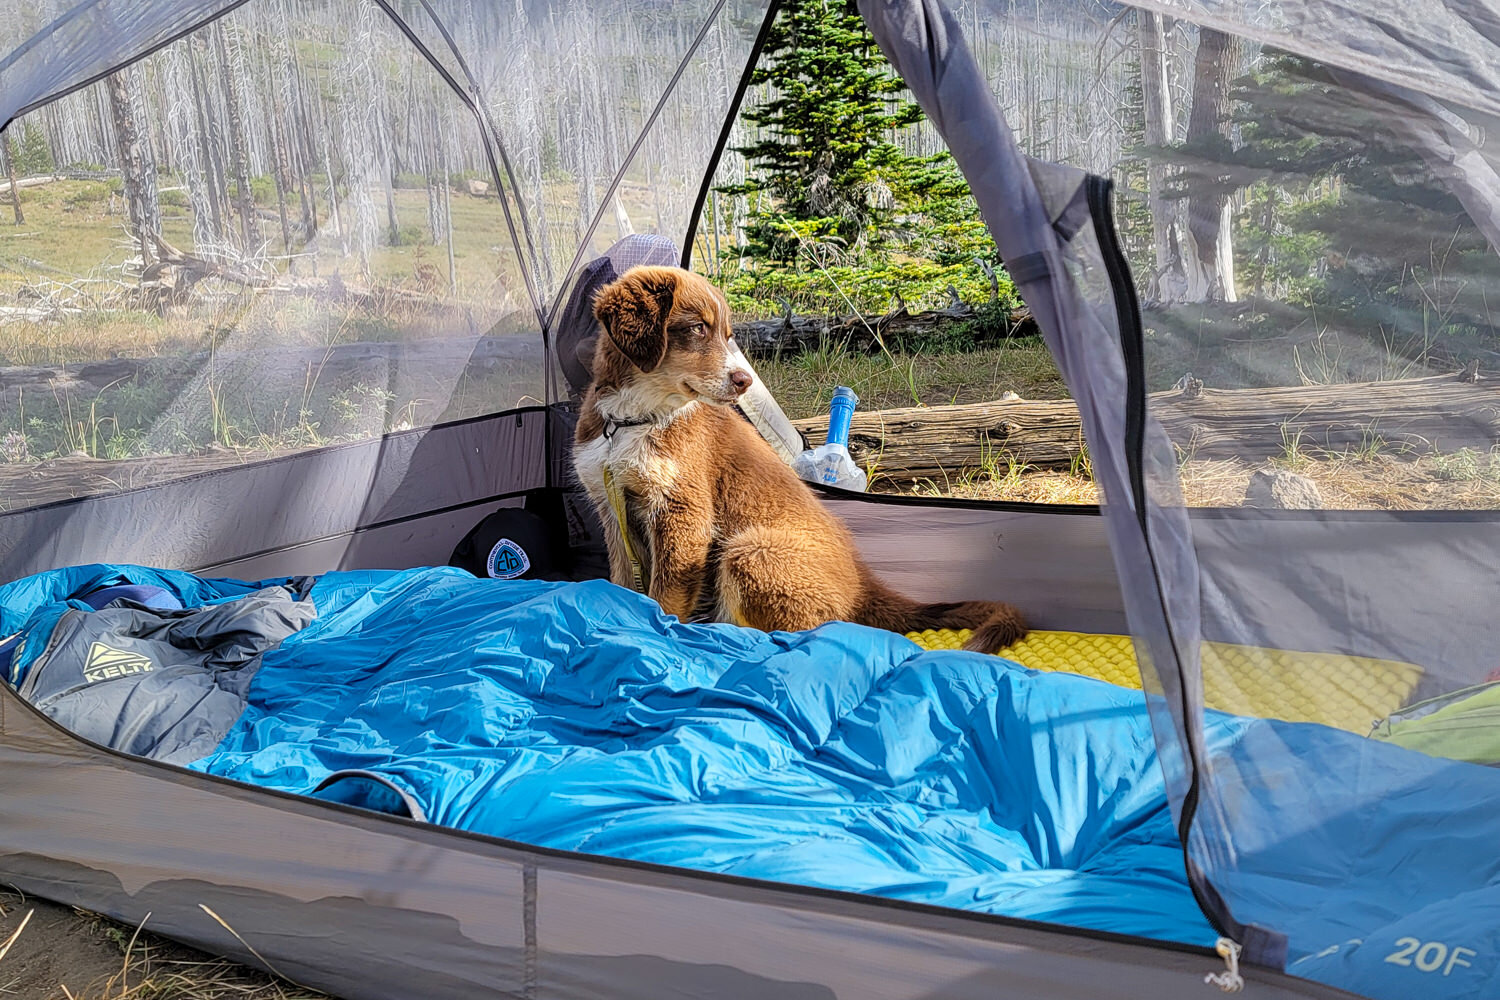 The Kelty Cosmic Down 20 is affordable & durable so it’s a great choice for backpacking with a furry companion